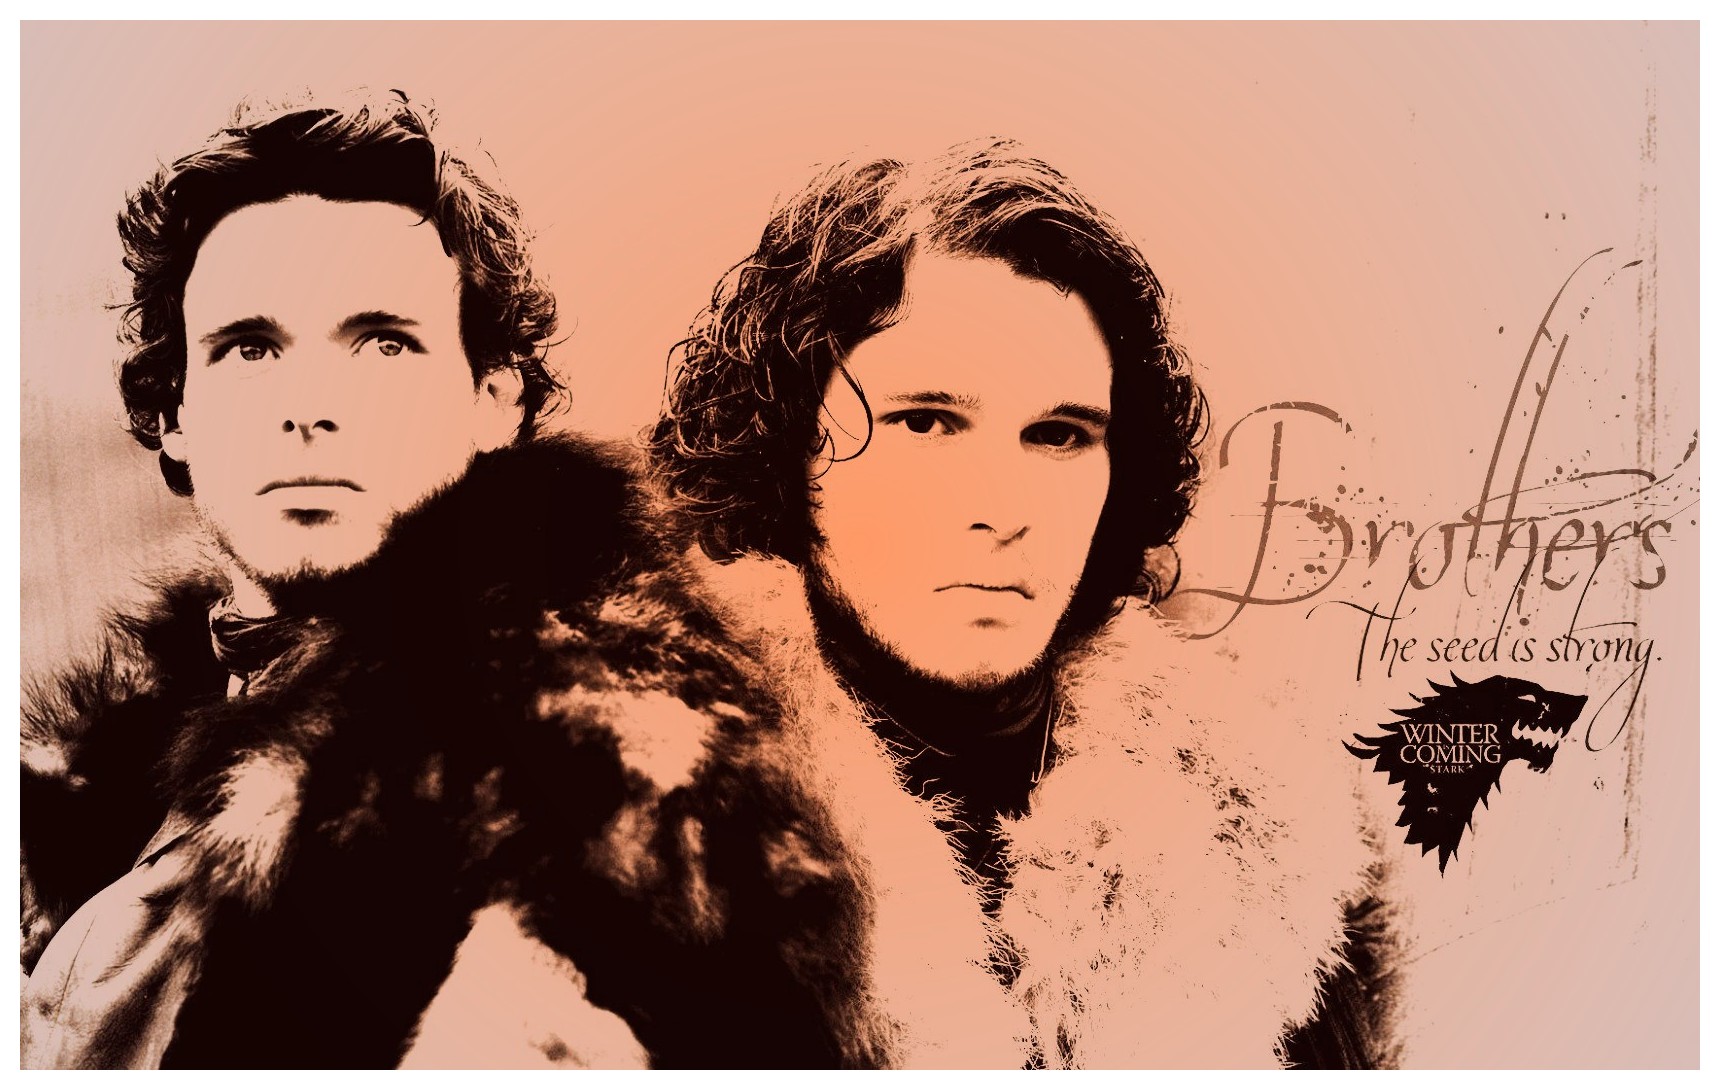 Game Of Thrones Winter Is Coming - Got Jon And Rob - HD Wallpaper 